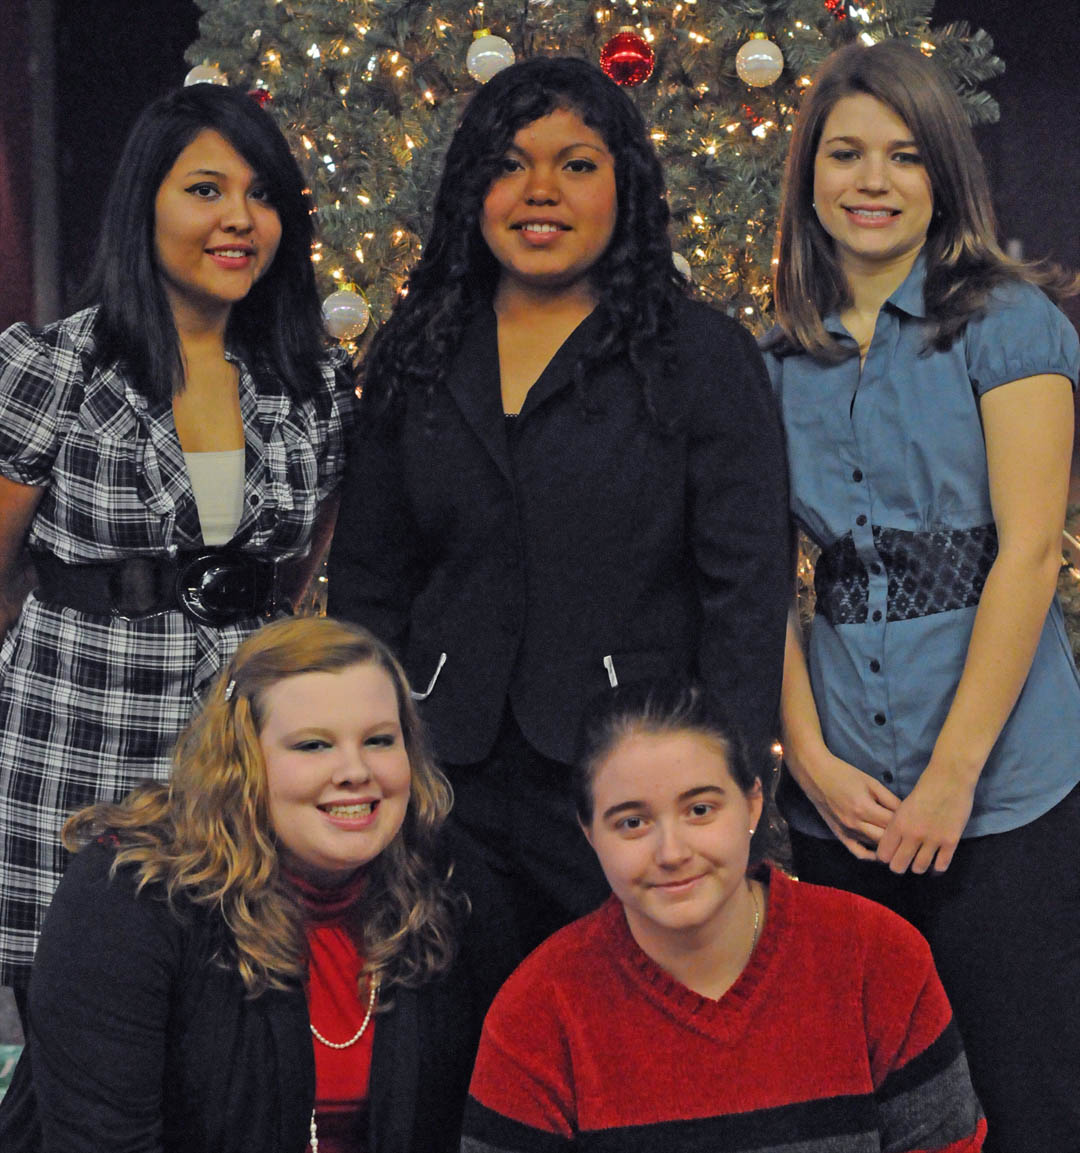 Click to enlarge,  Lee Early College students (front, from left) Ariel Hickerson and Amanda Barnes, and (back, from left) Kimberly Castillo, Nancy Urias, and Danielle Fiore, received their high school diplomas and Associate in Arts-University Transfer degrees Dec. 22 in graduation exercises at the Dennis A. Wicker Civic Center. Lee Early College is a collaboration of Lee County Schools and Central Carolina Community College. LEC students can, within five years, earn both a high school diploma and an associate degree at no cost. All five plan to continue their education at a university. They will have standing as juniors because they earned their A.A.-U.T degrees. For more information about Lee Early College, visit its Web site, www.leeearlycollege.com. For more information about Central Carolina Community College, visit  www.cccc.edu . 